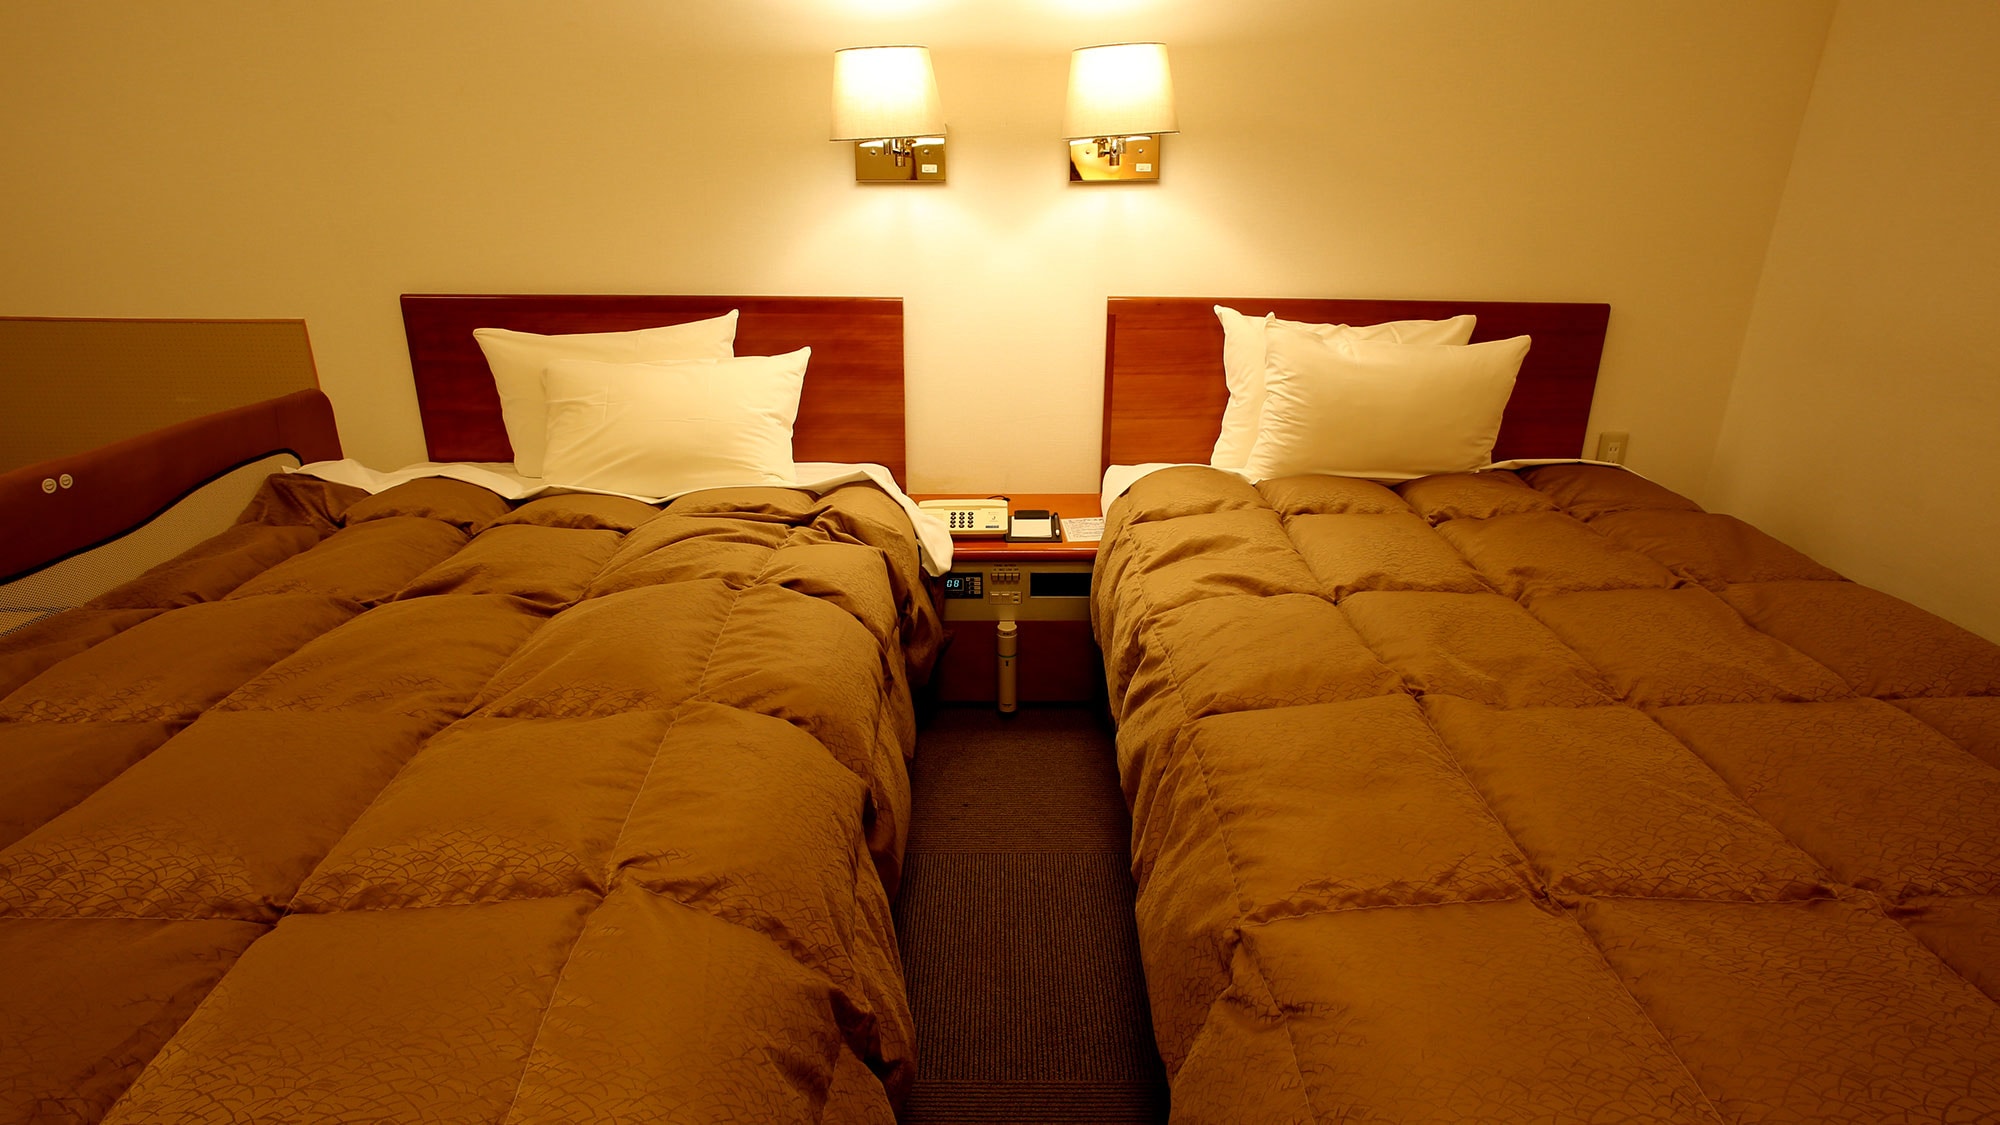 ■ Japanese and Western bed